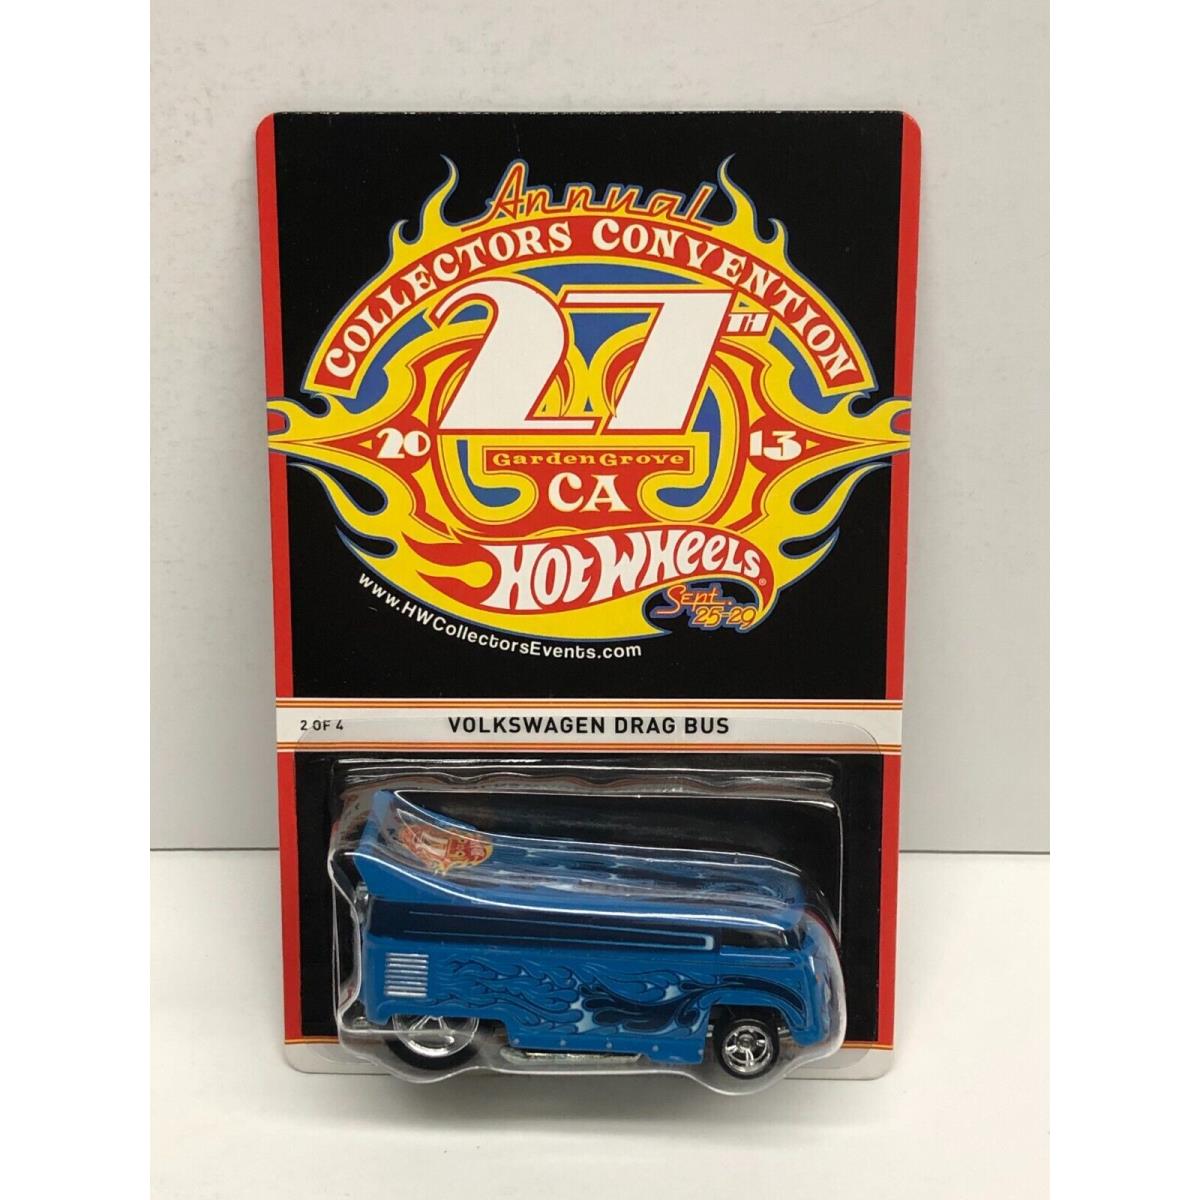 Hot Wheels 2013 27th Collectors Convention Volkswagen Drag Bus Limited Edition